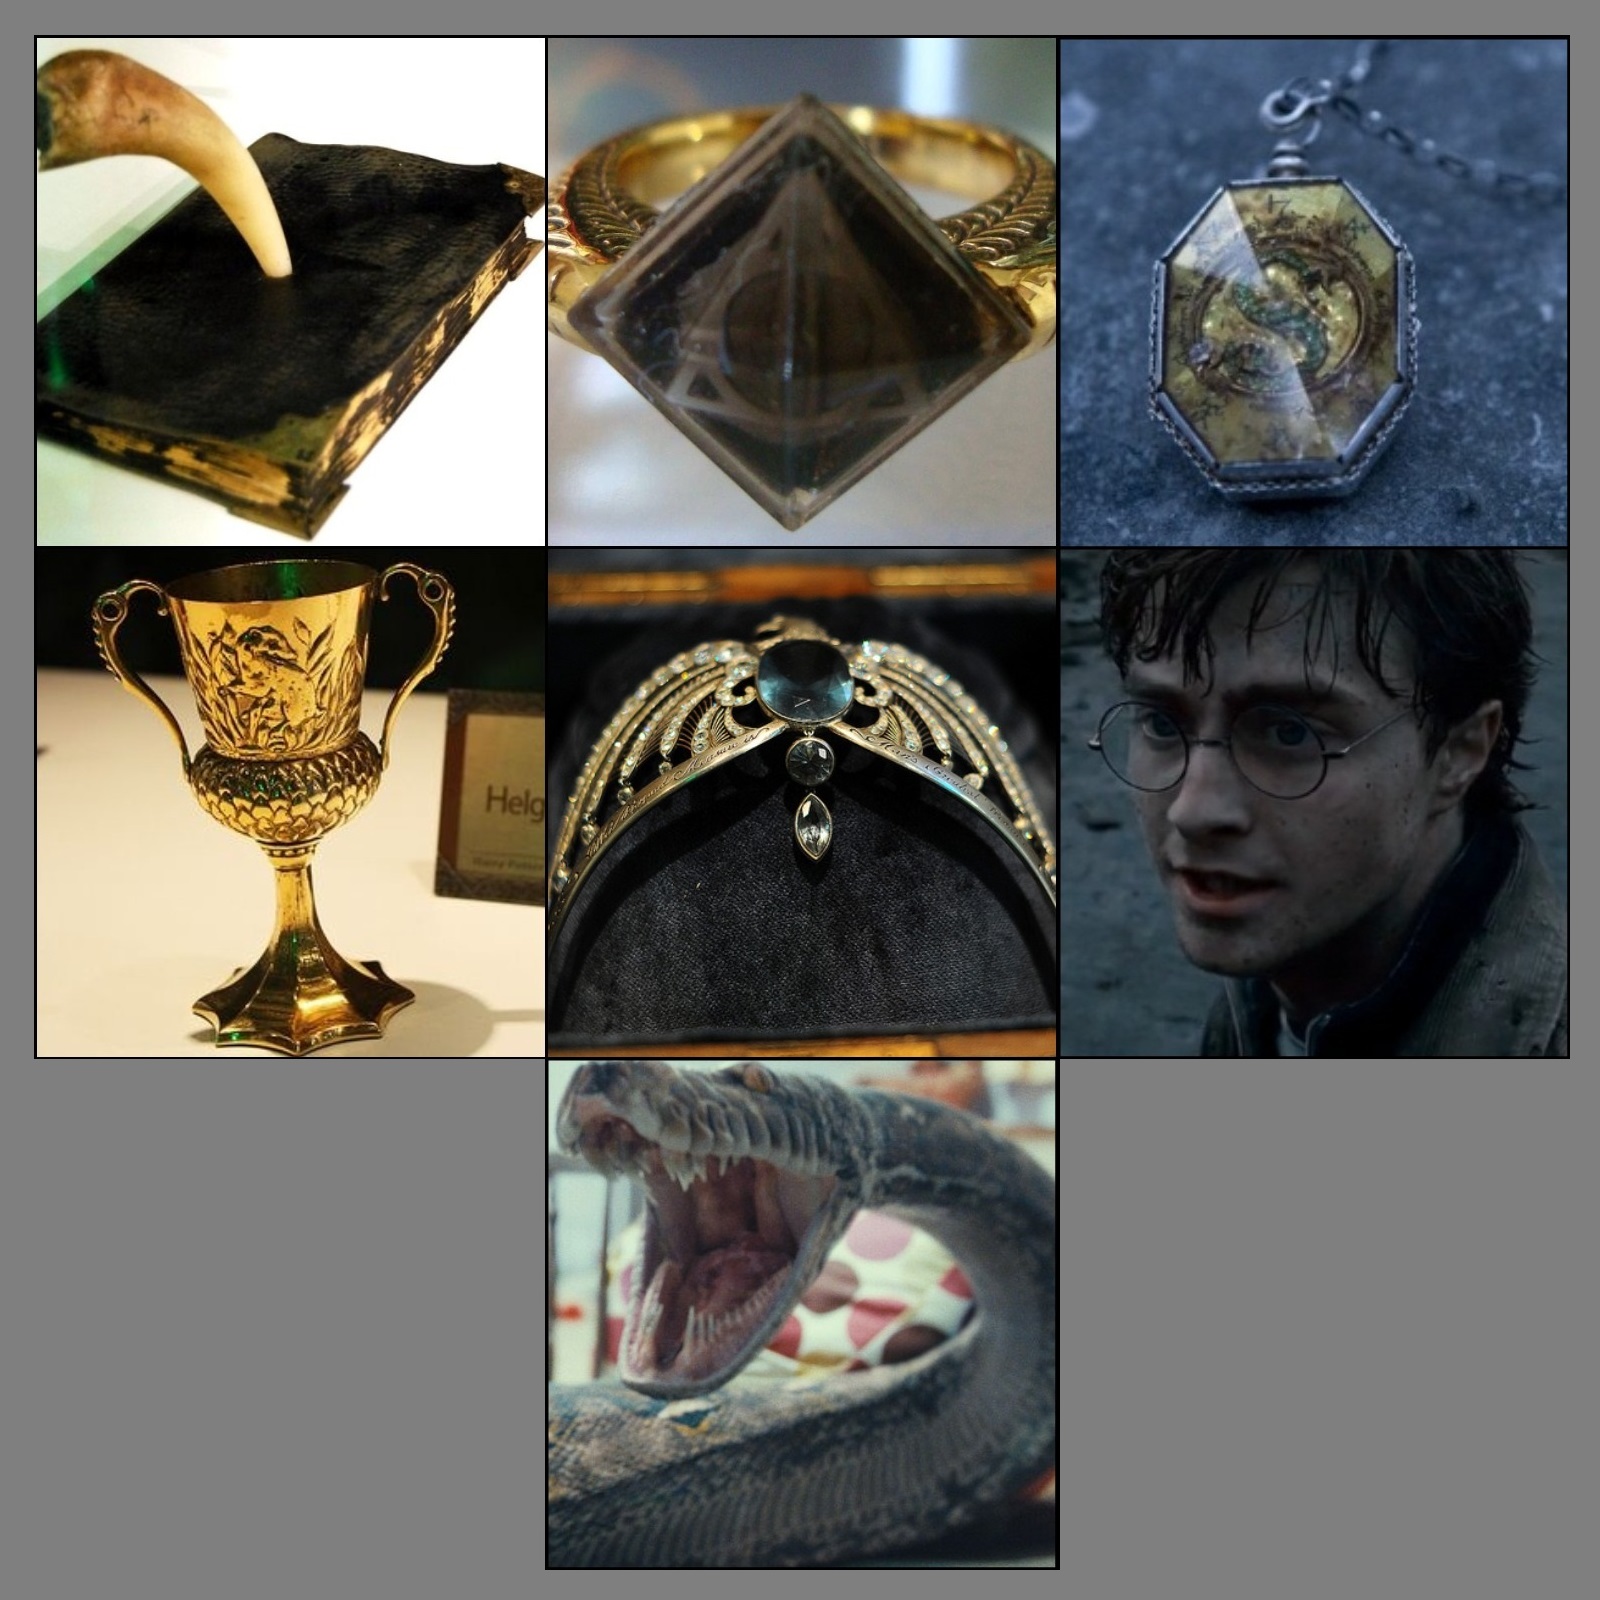 Harry Potter – How did Harry become a Horcrux?